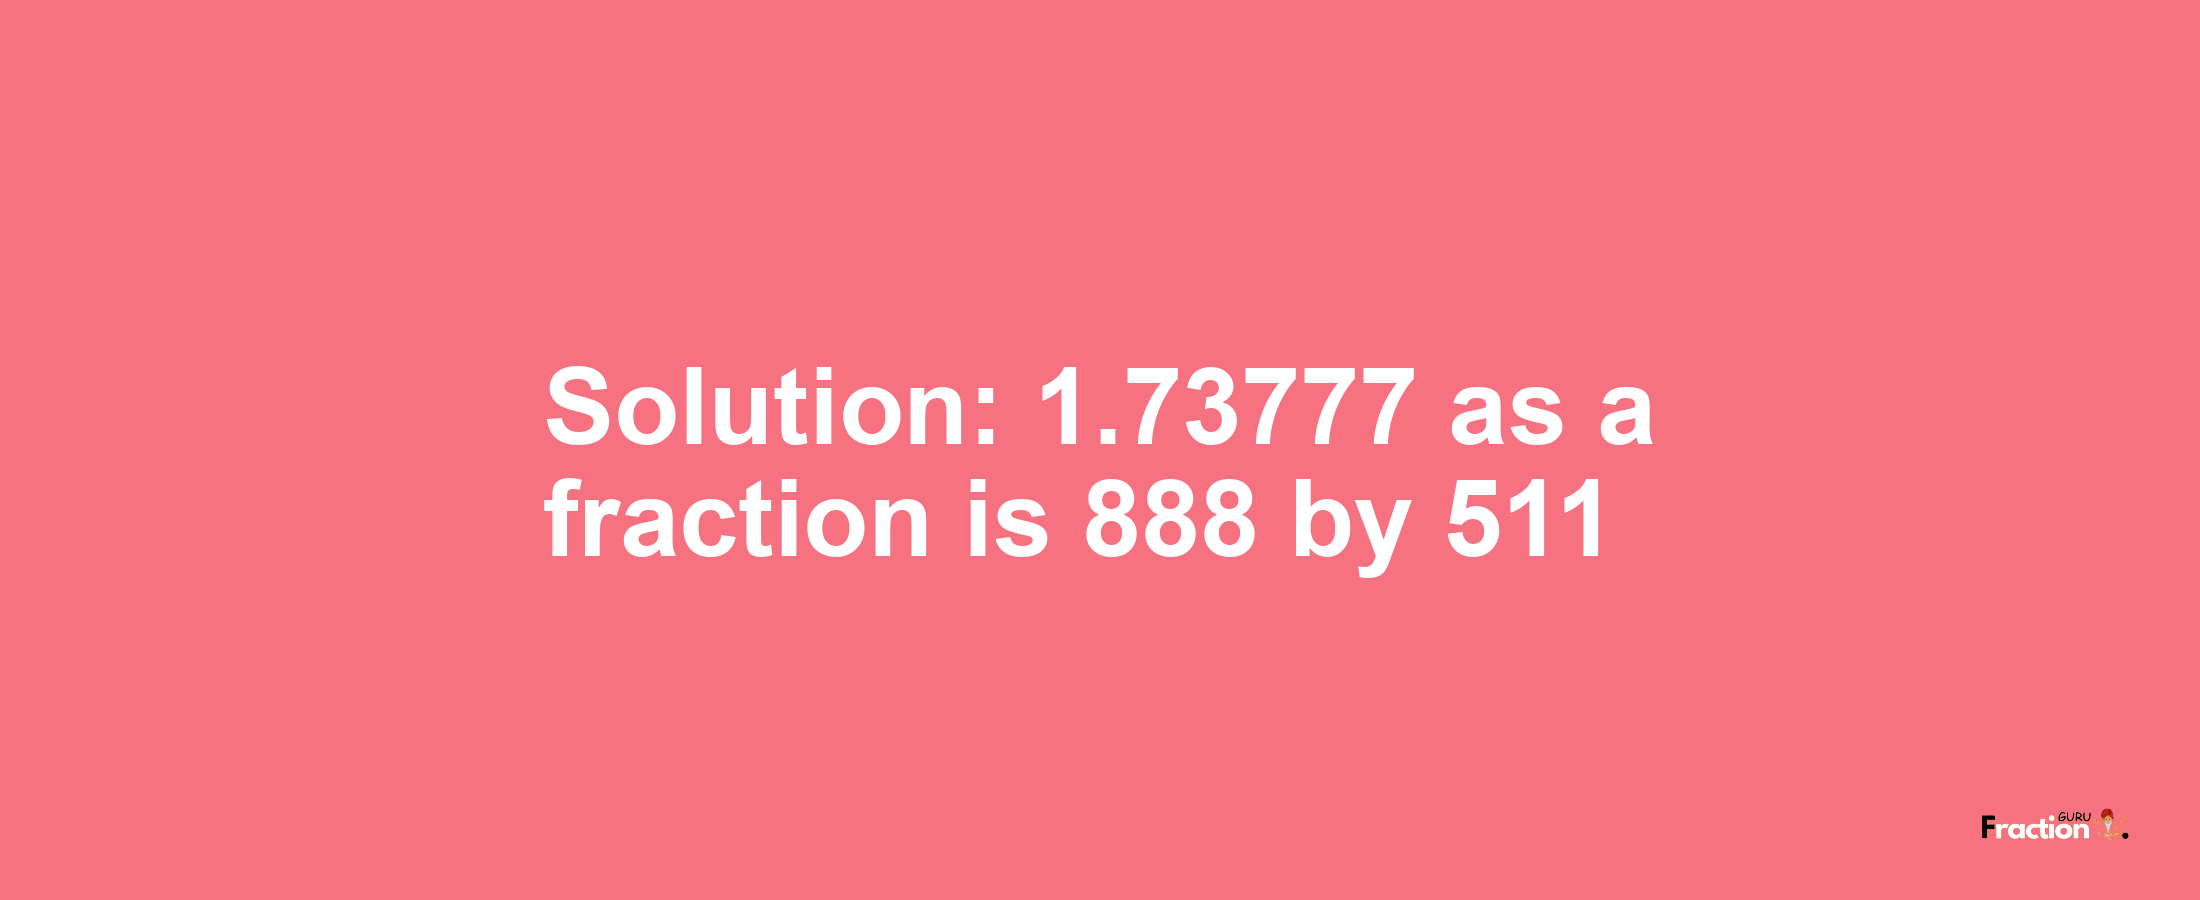 Solution:1.73777 as a fraction is 888/511